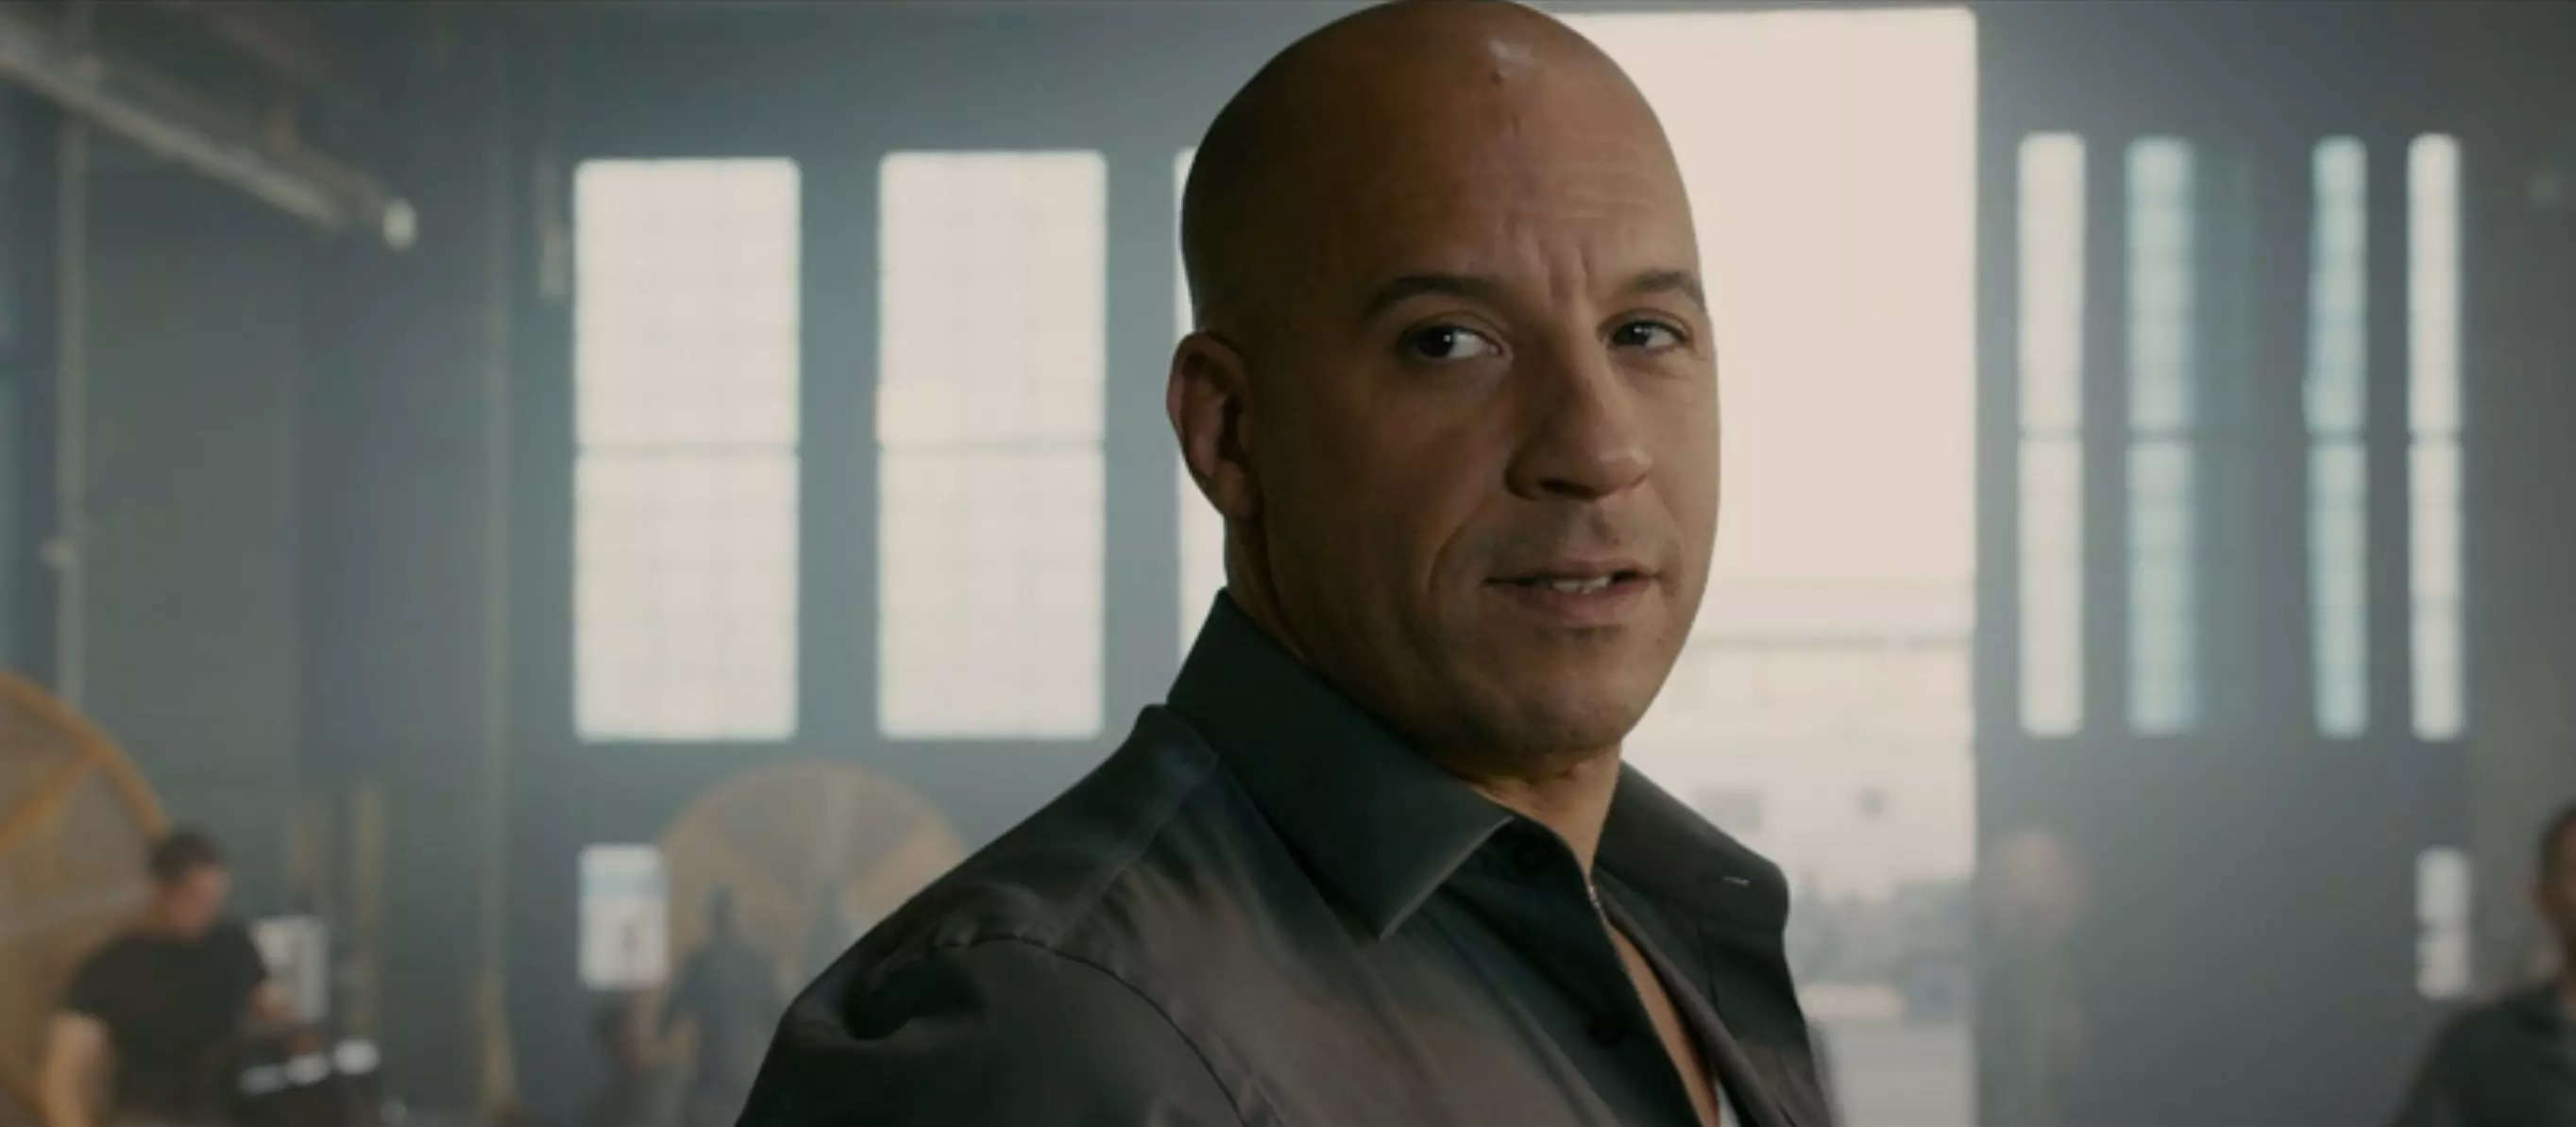 Vin Diesel's former assistant accuses him of sexual battery in new ...